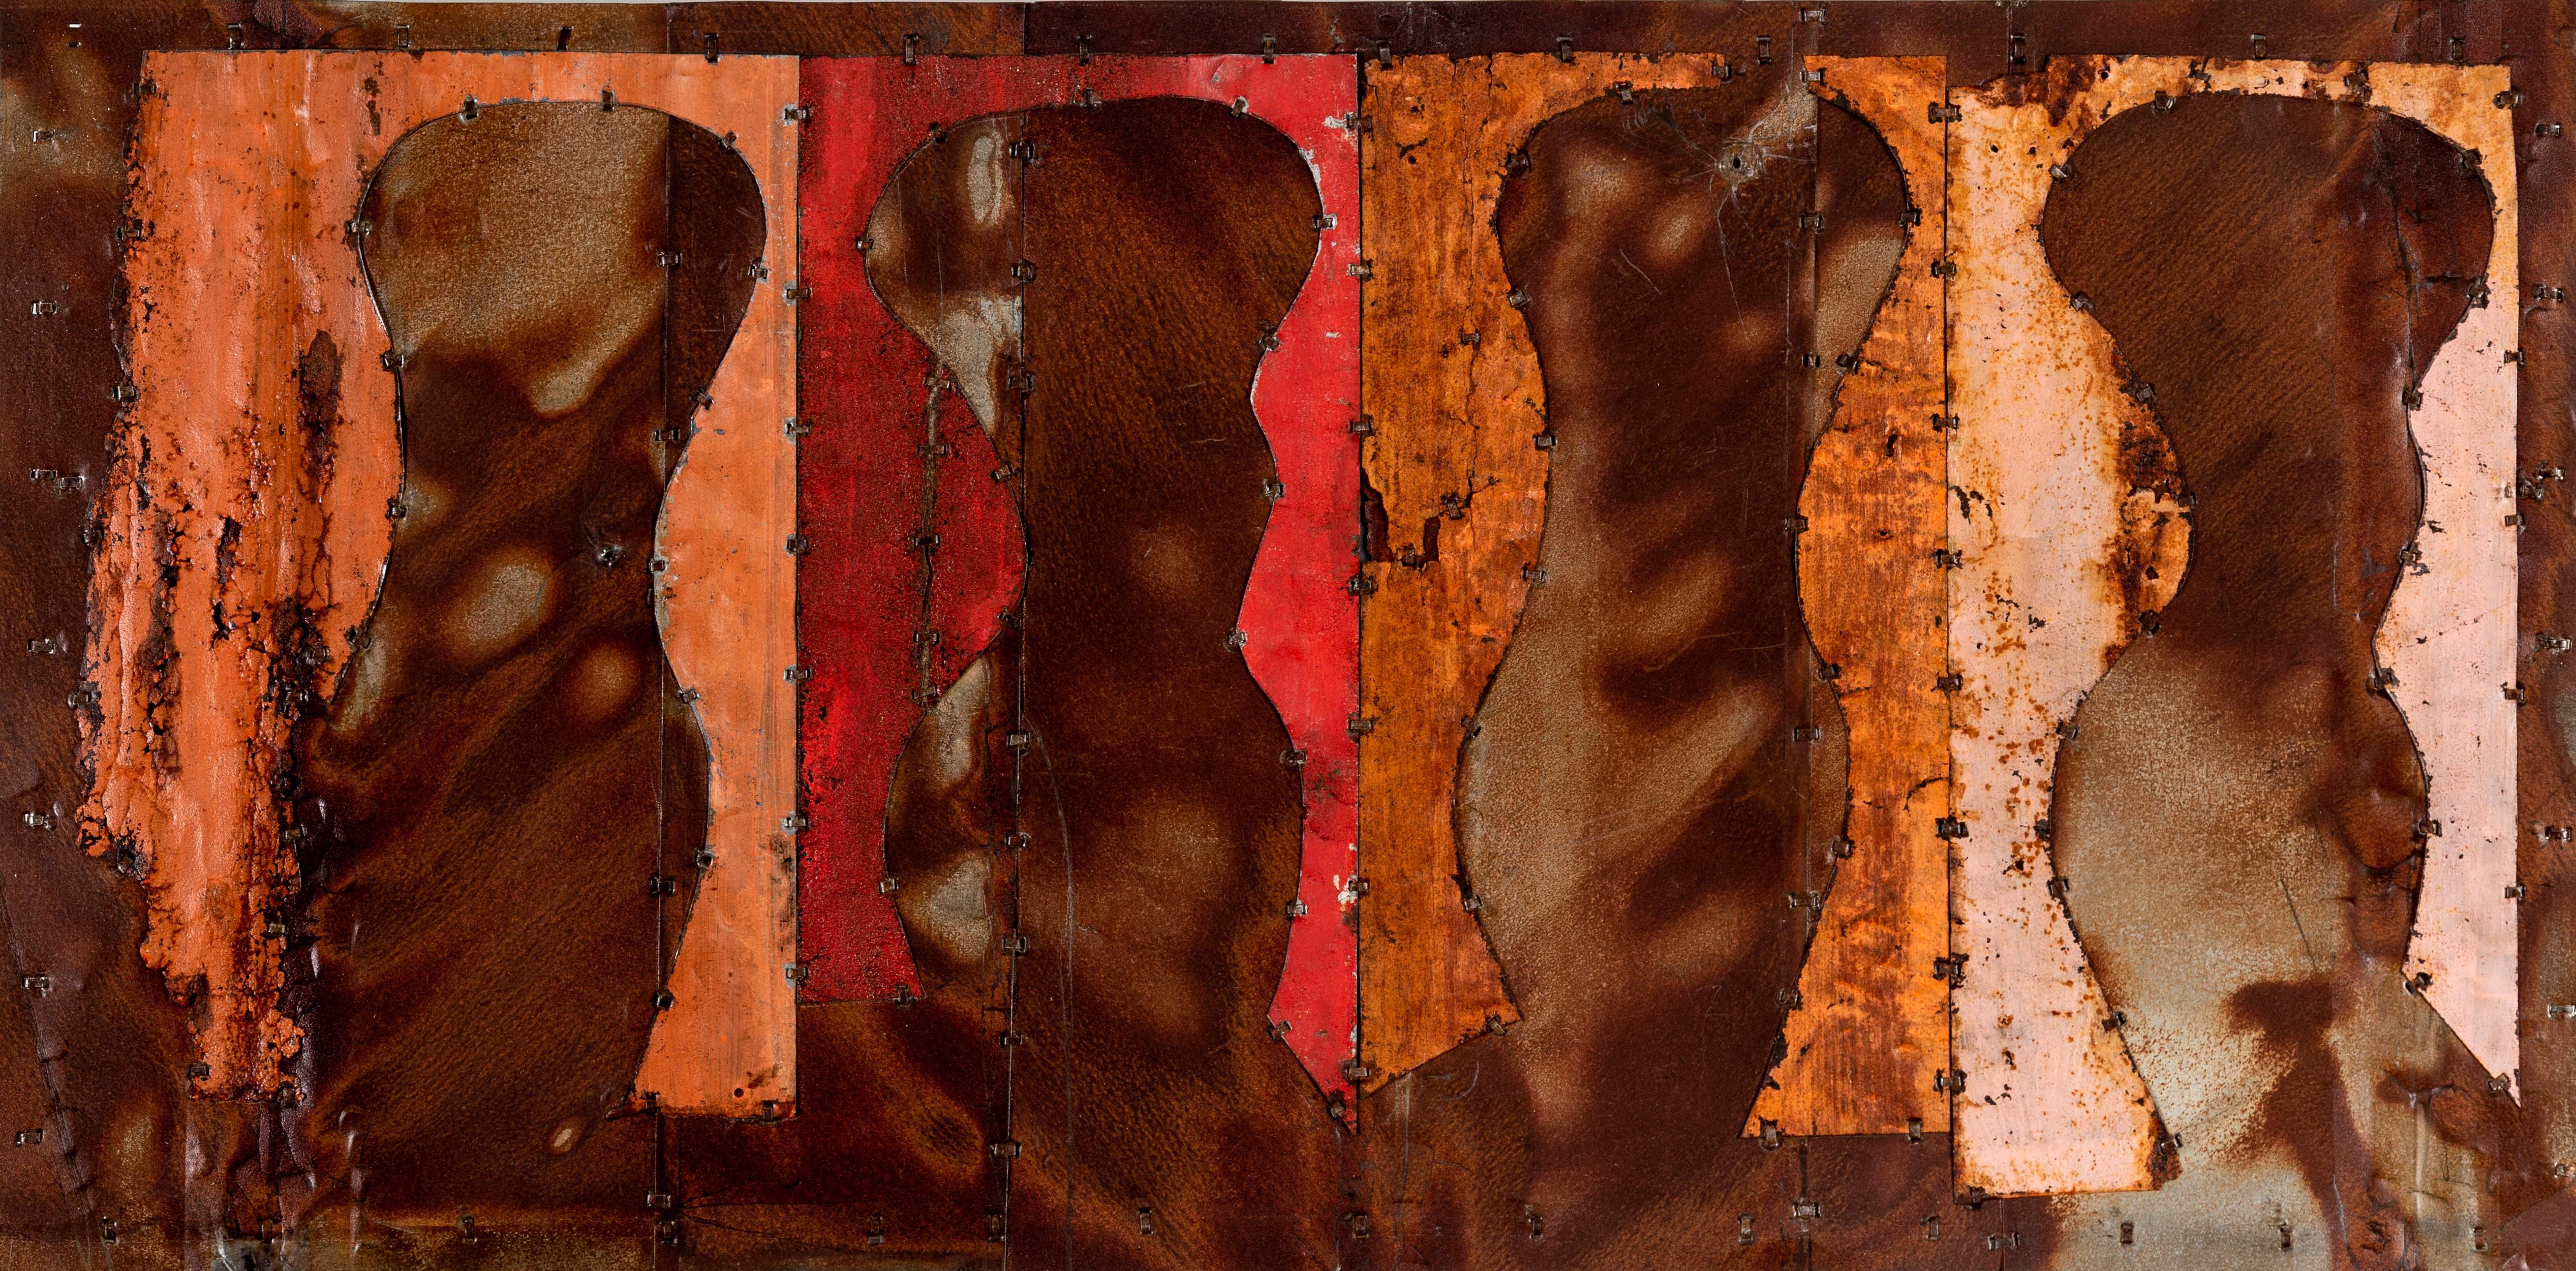 Mark Hilltout Figurative Painting - Large Abstract Metal Composition "Four Torsos: Study 4"